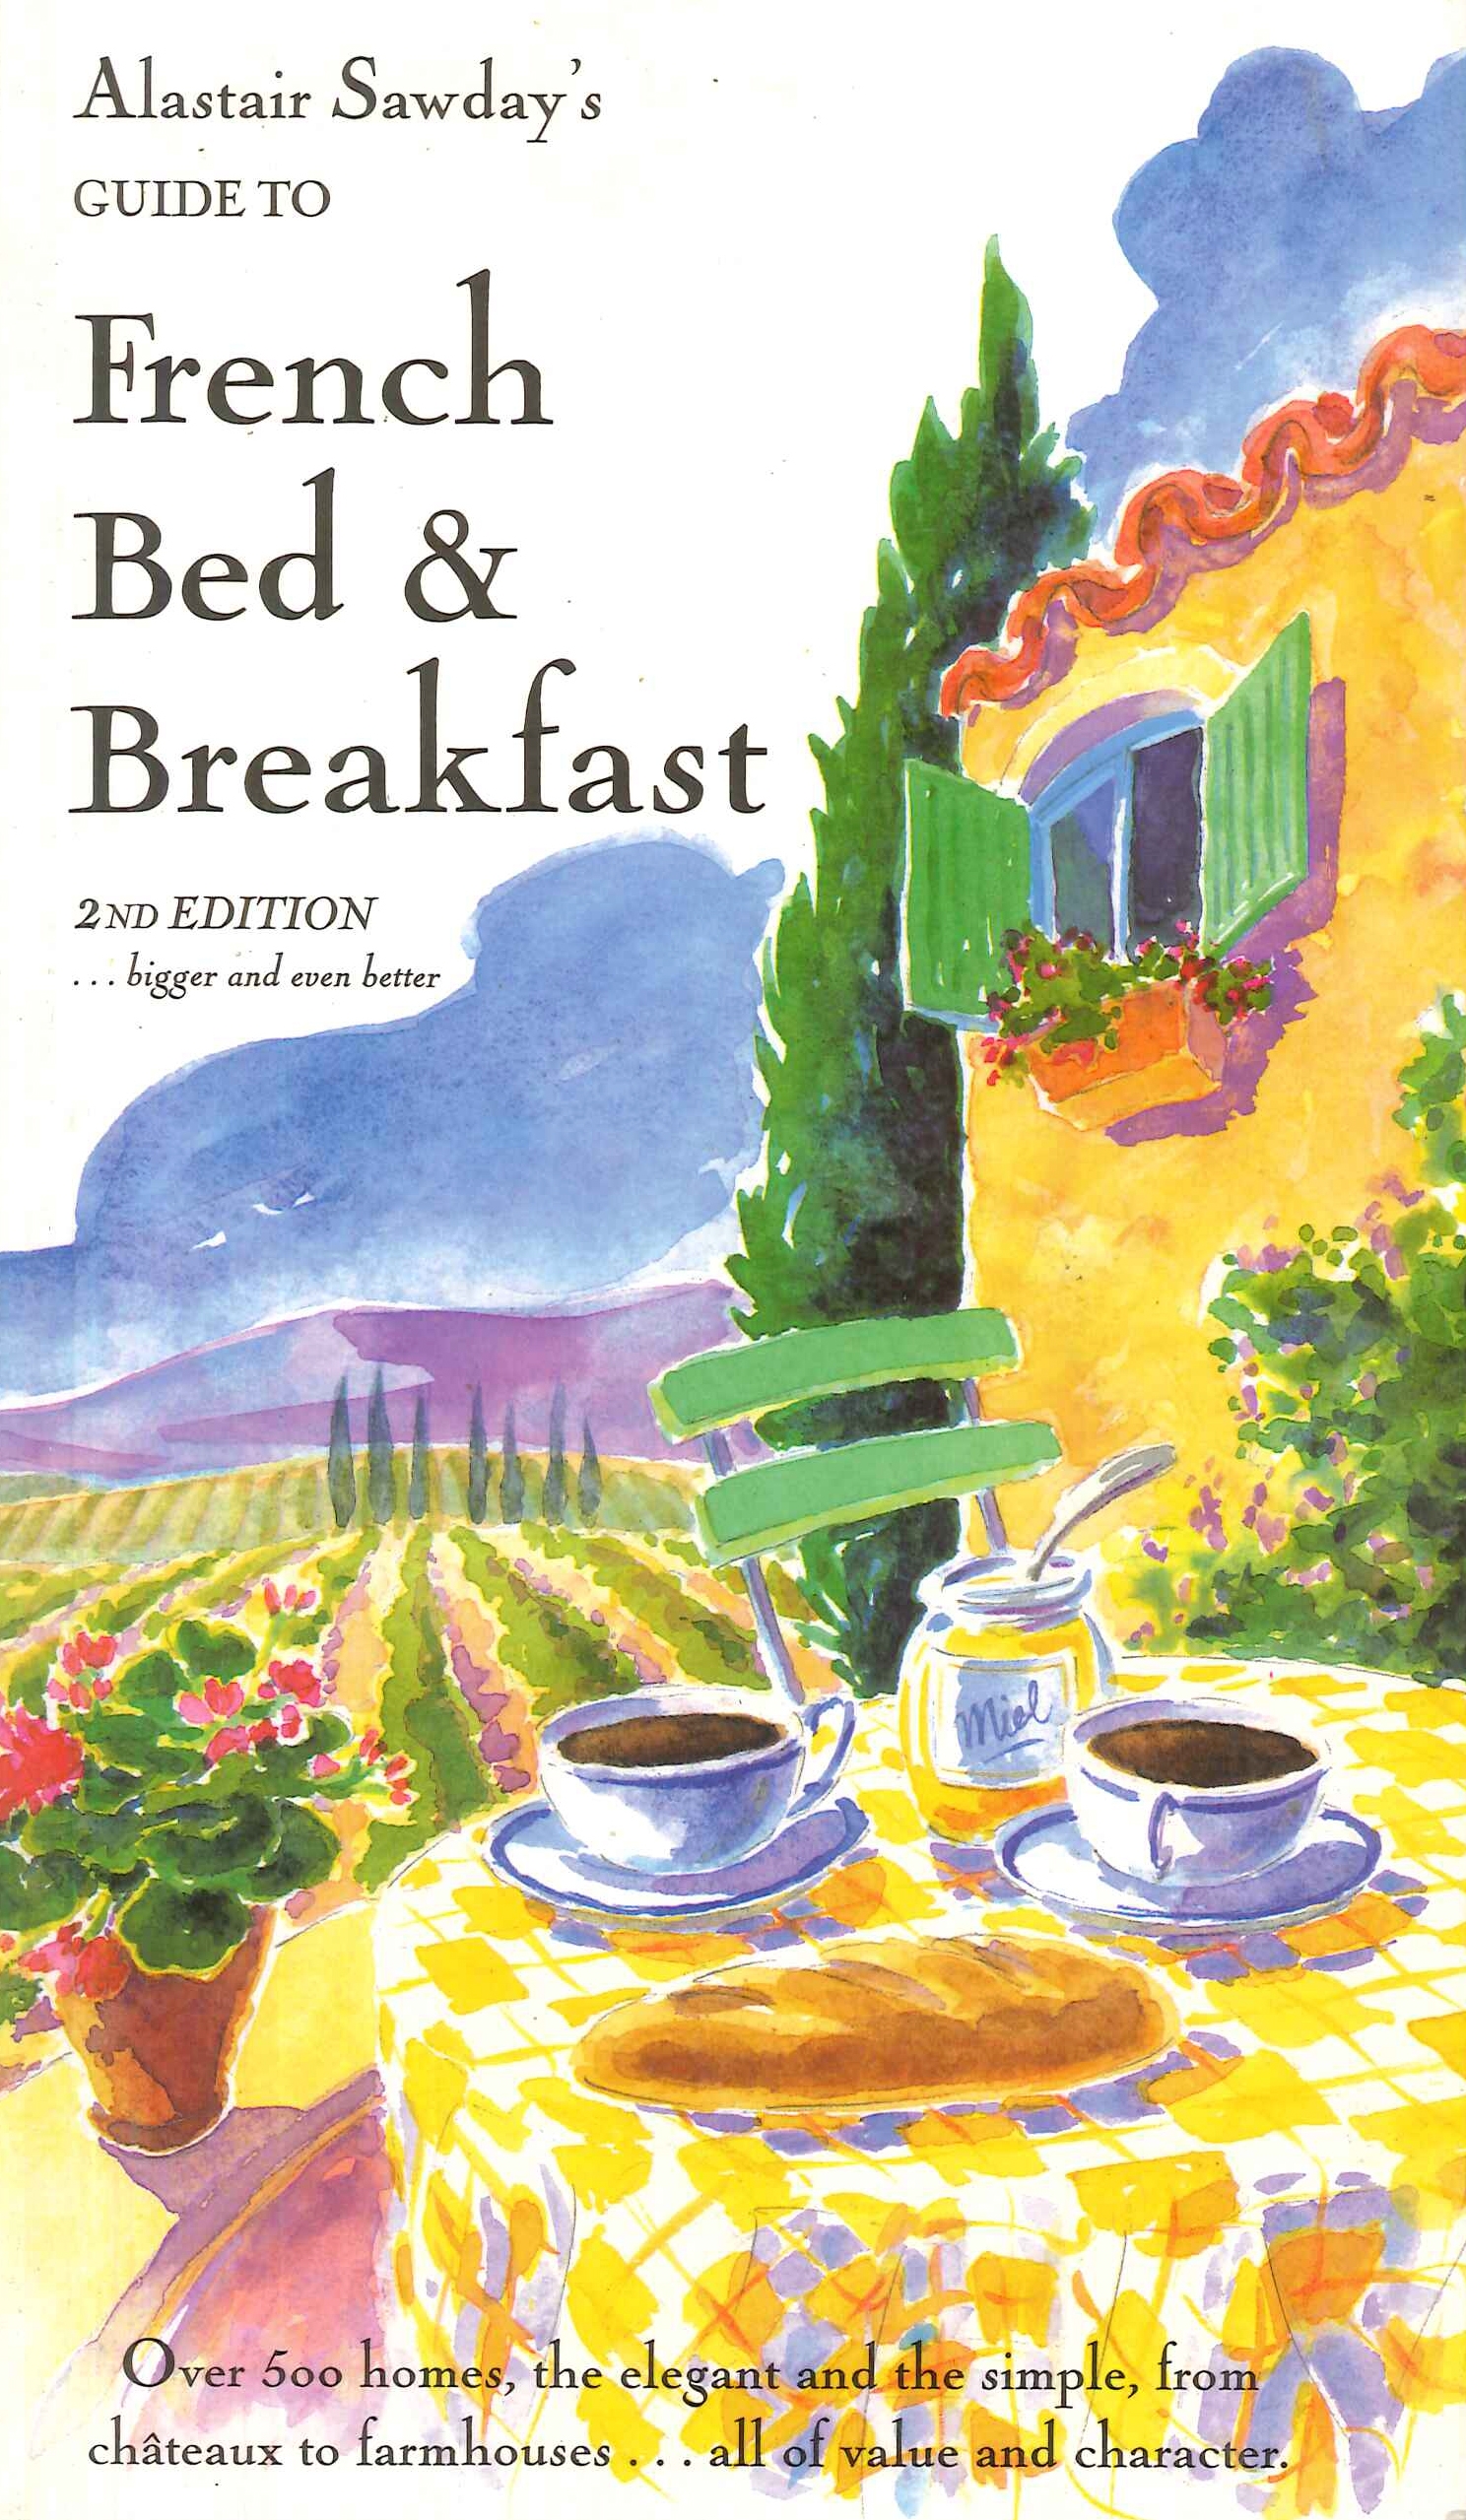 Alistair Sawday's Guide to French Bed & Breakfast - [New Amsterdam Books] - Afbeelding 1 van 1